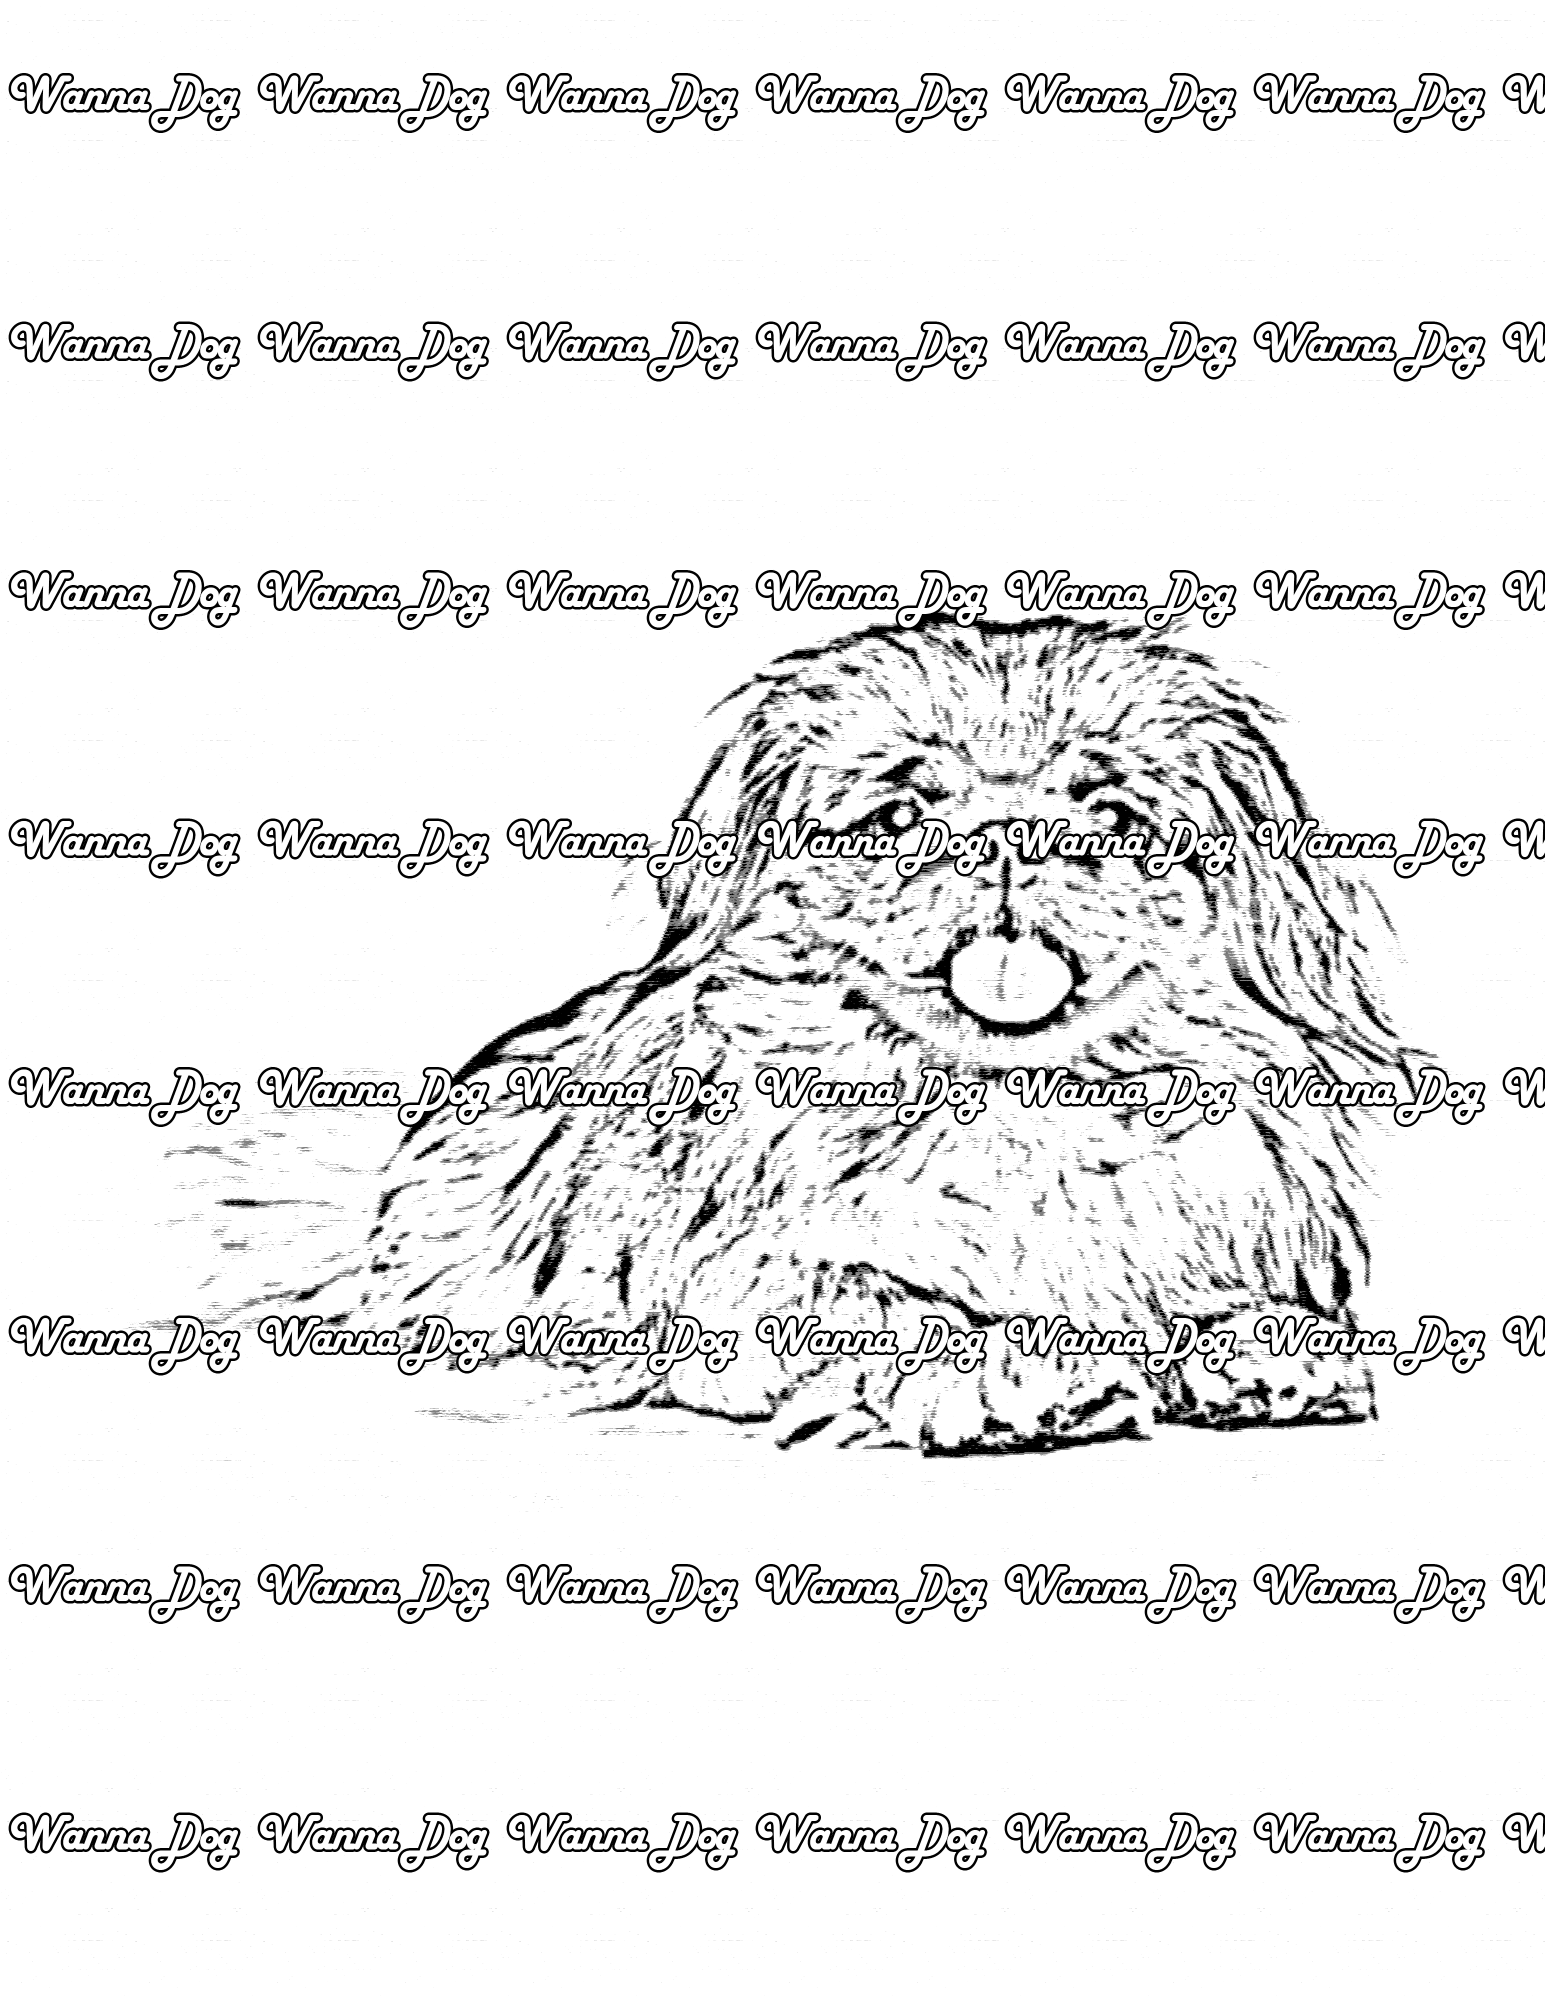 Pekingese Coloring Page of a Pekingese laying down and posing